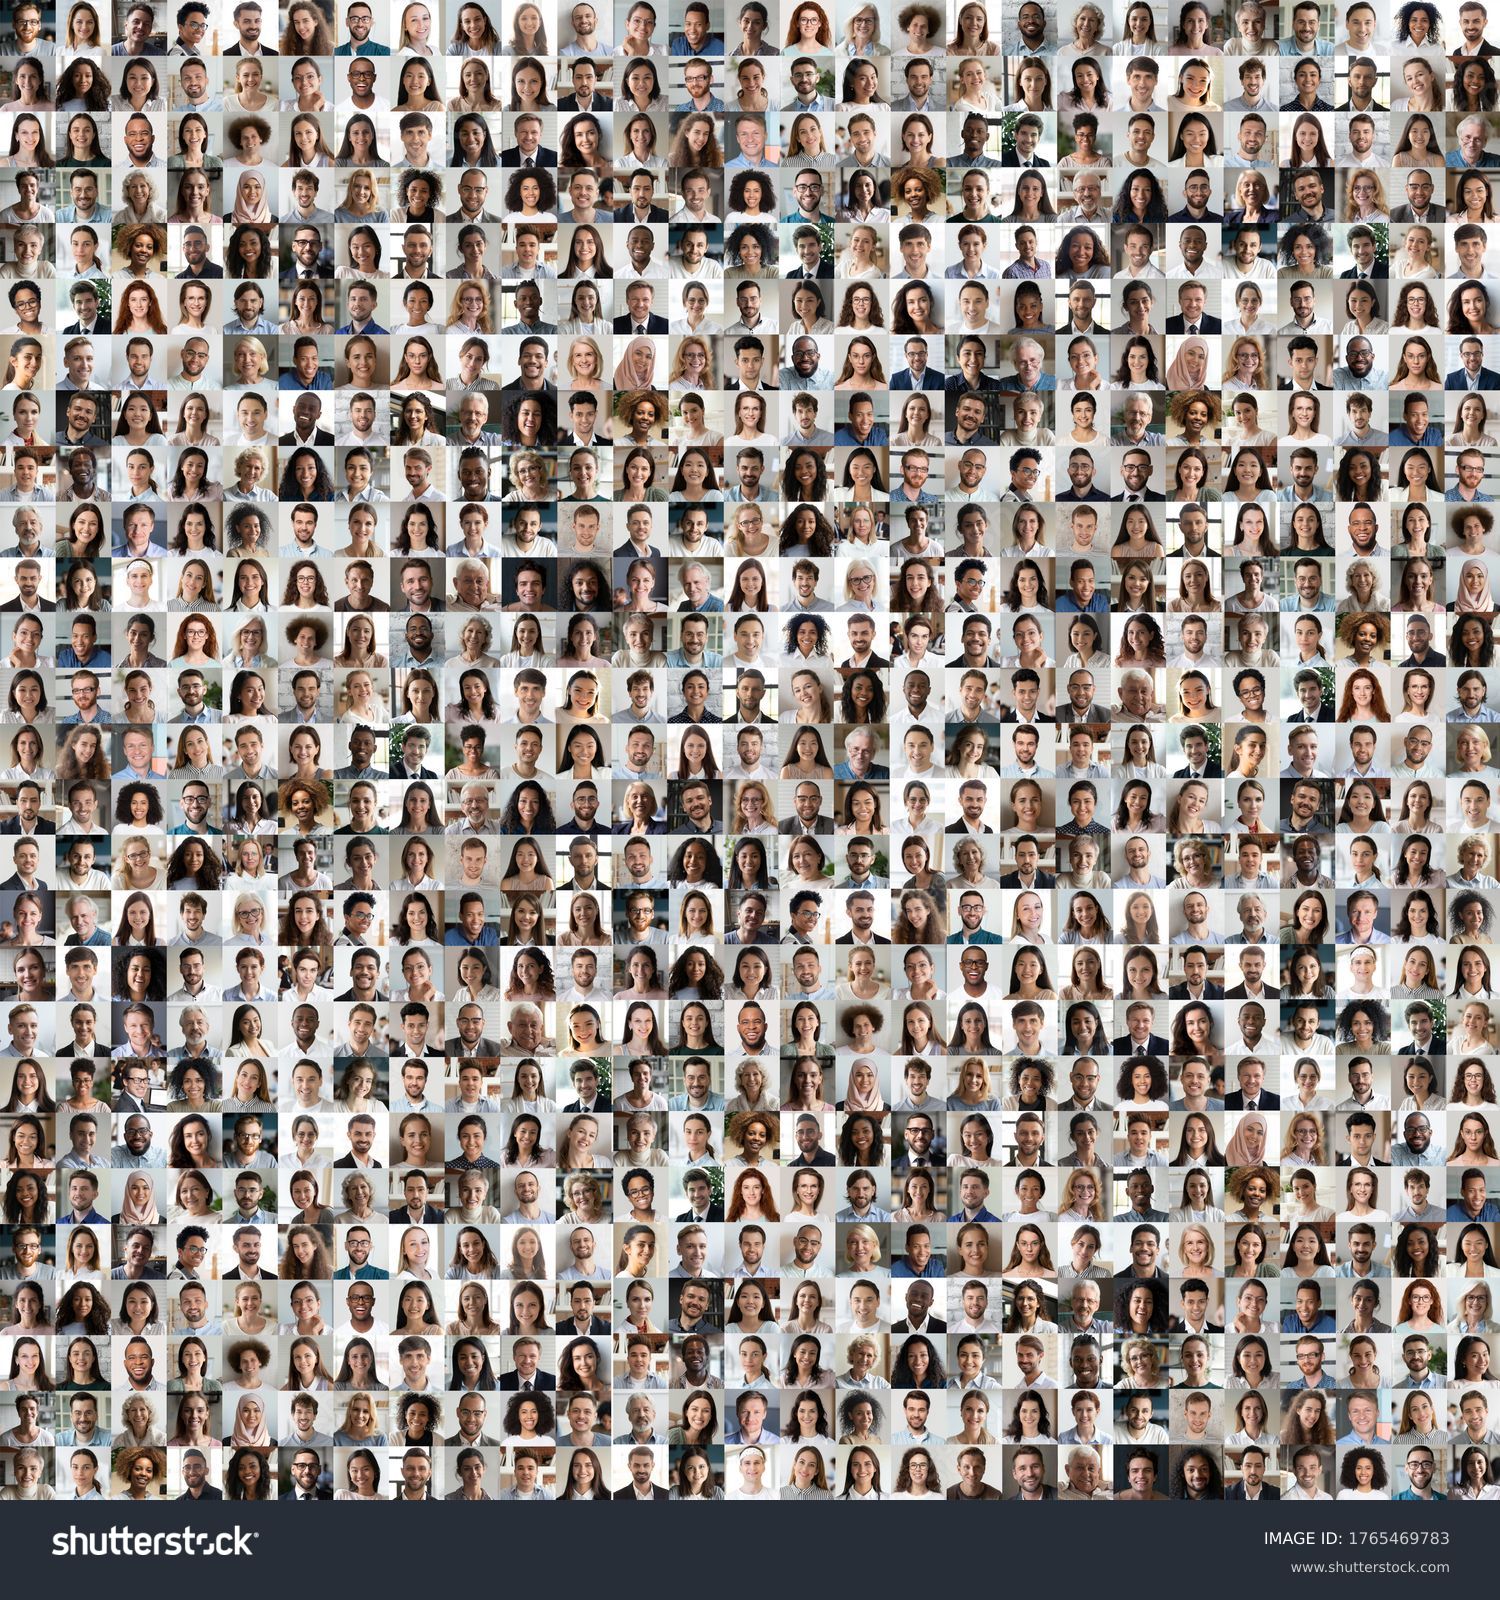 Lot of different multiracial people headshots portraits in square collage mosaic image. Many hundreds of diverse age and ethnicity people faces looking at camera collection. Social diversity concept. #1765469783